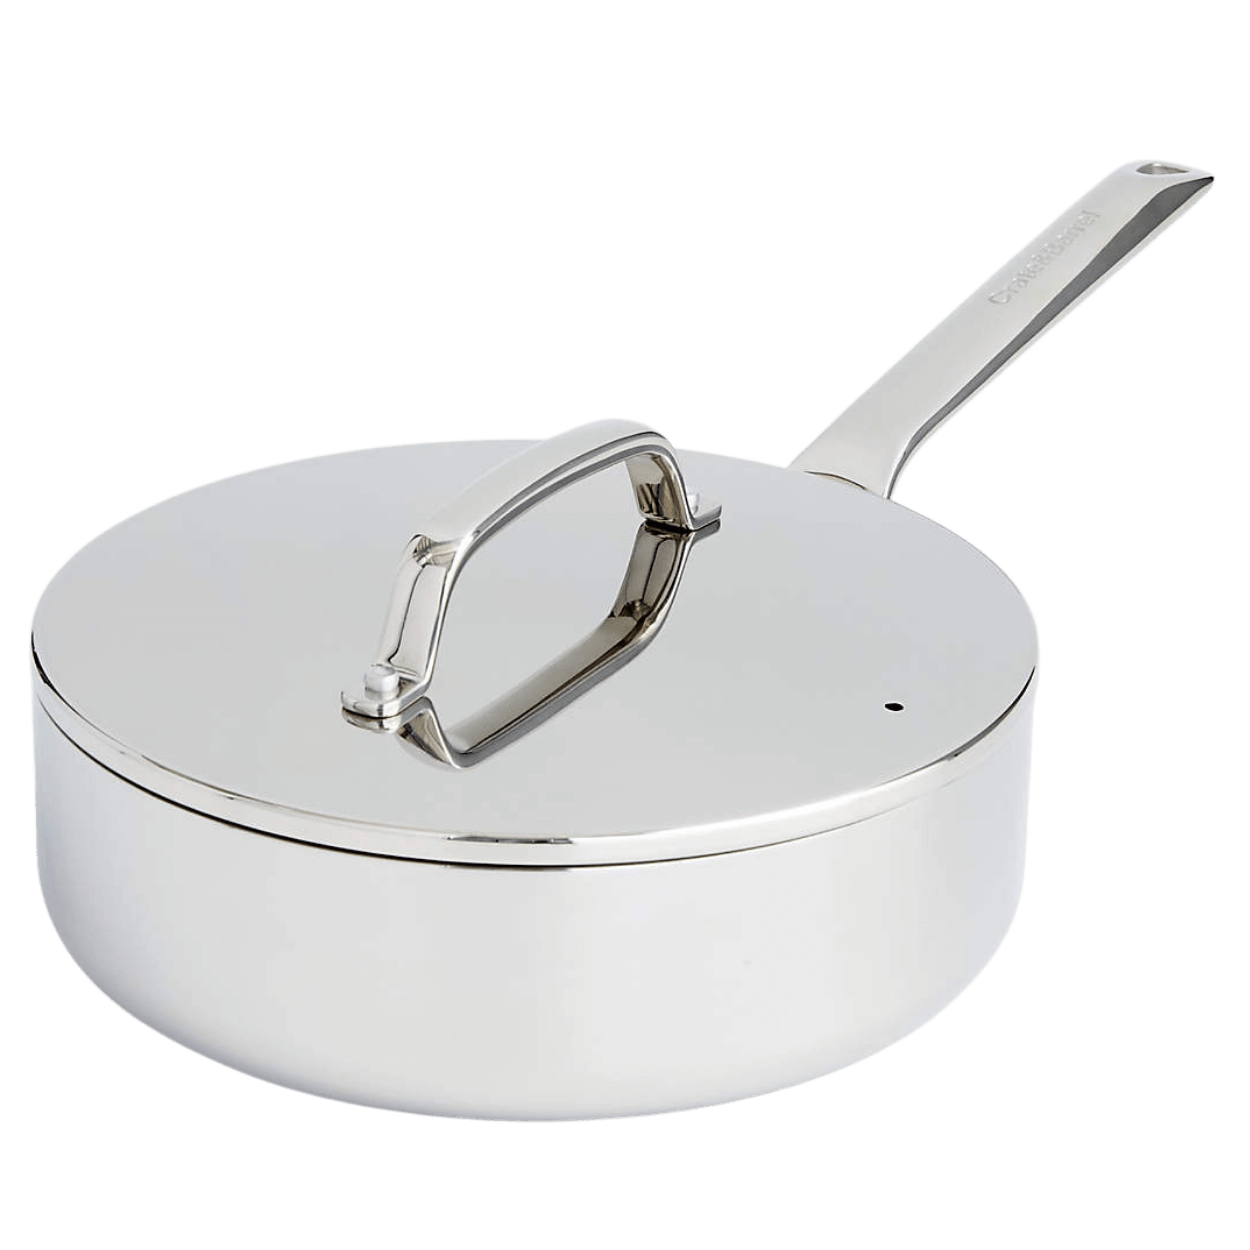 https://ellegourmet.ca/wp-content/uploads/2022/05/Story_Saute-Pans-_CB-stainless.png